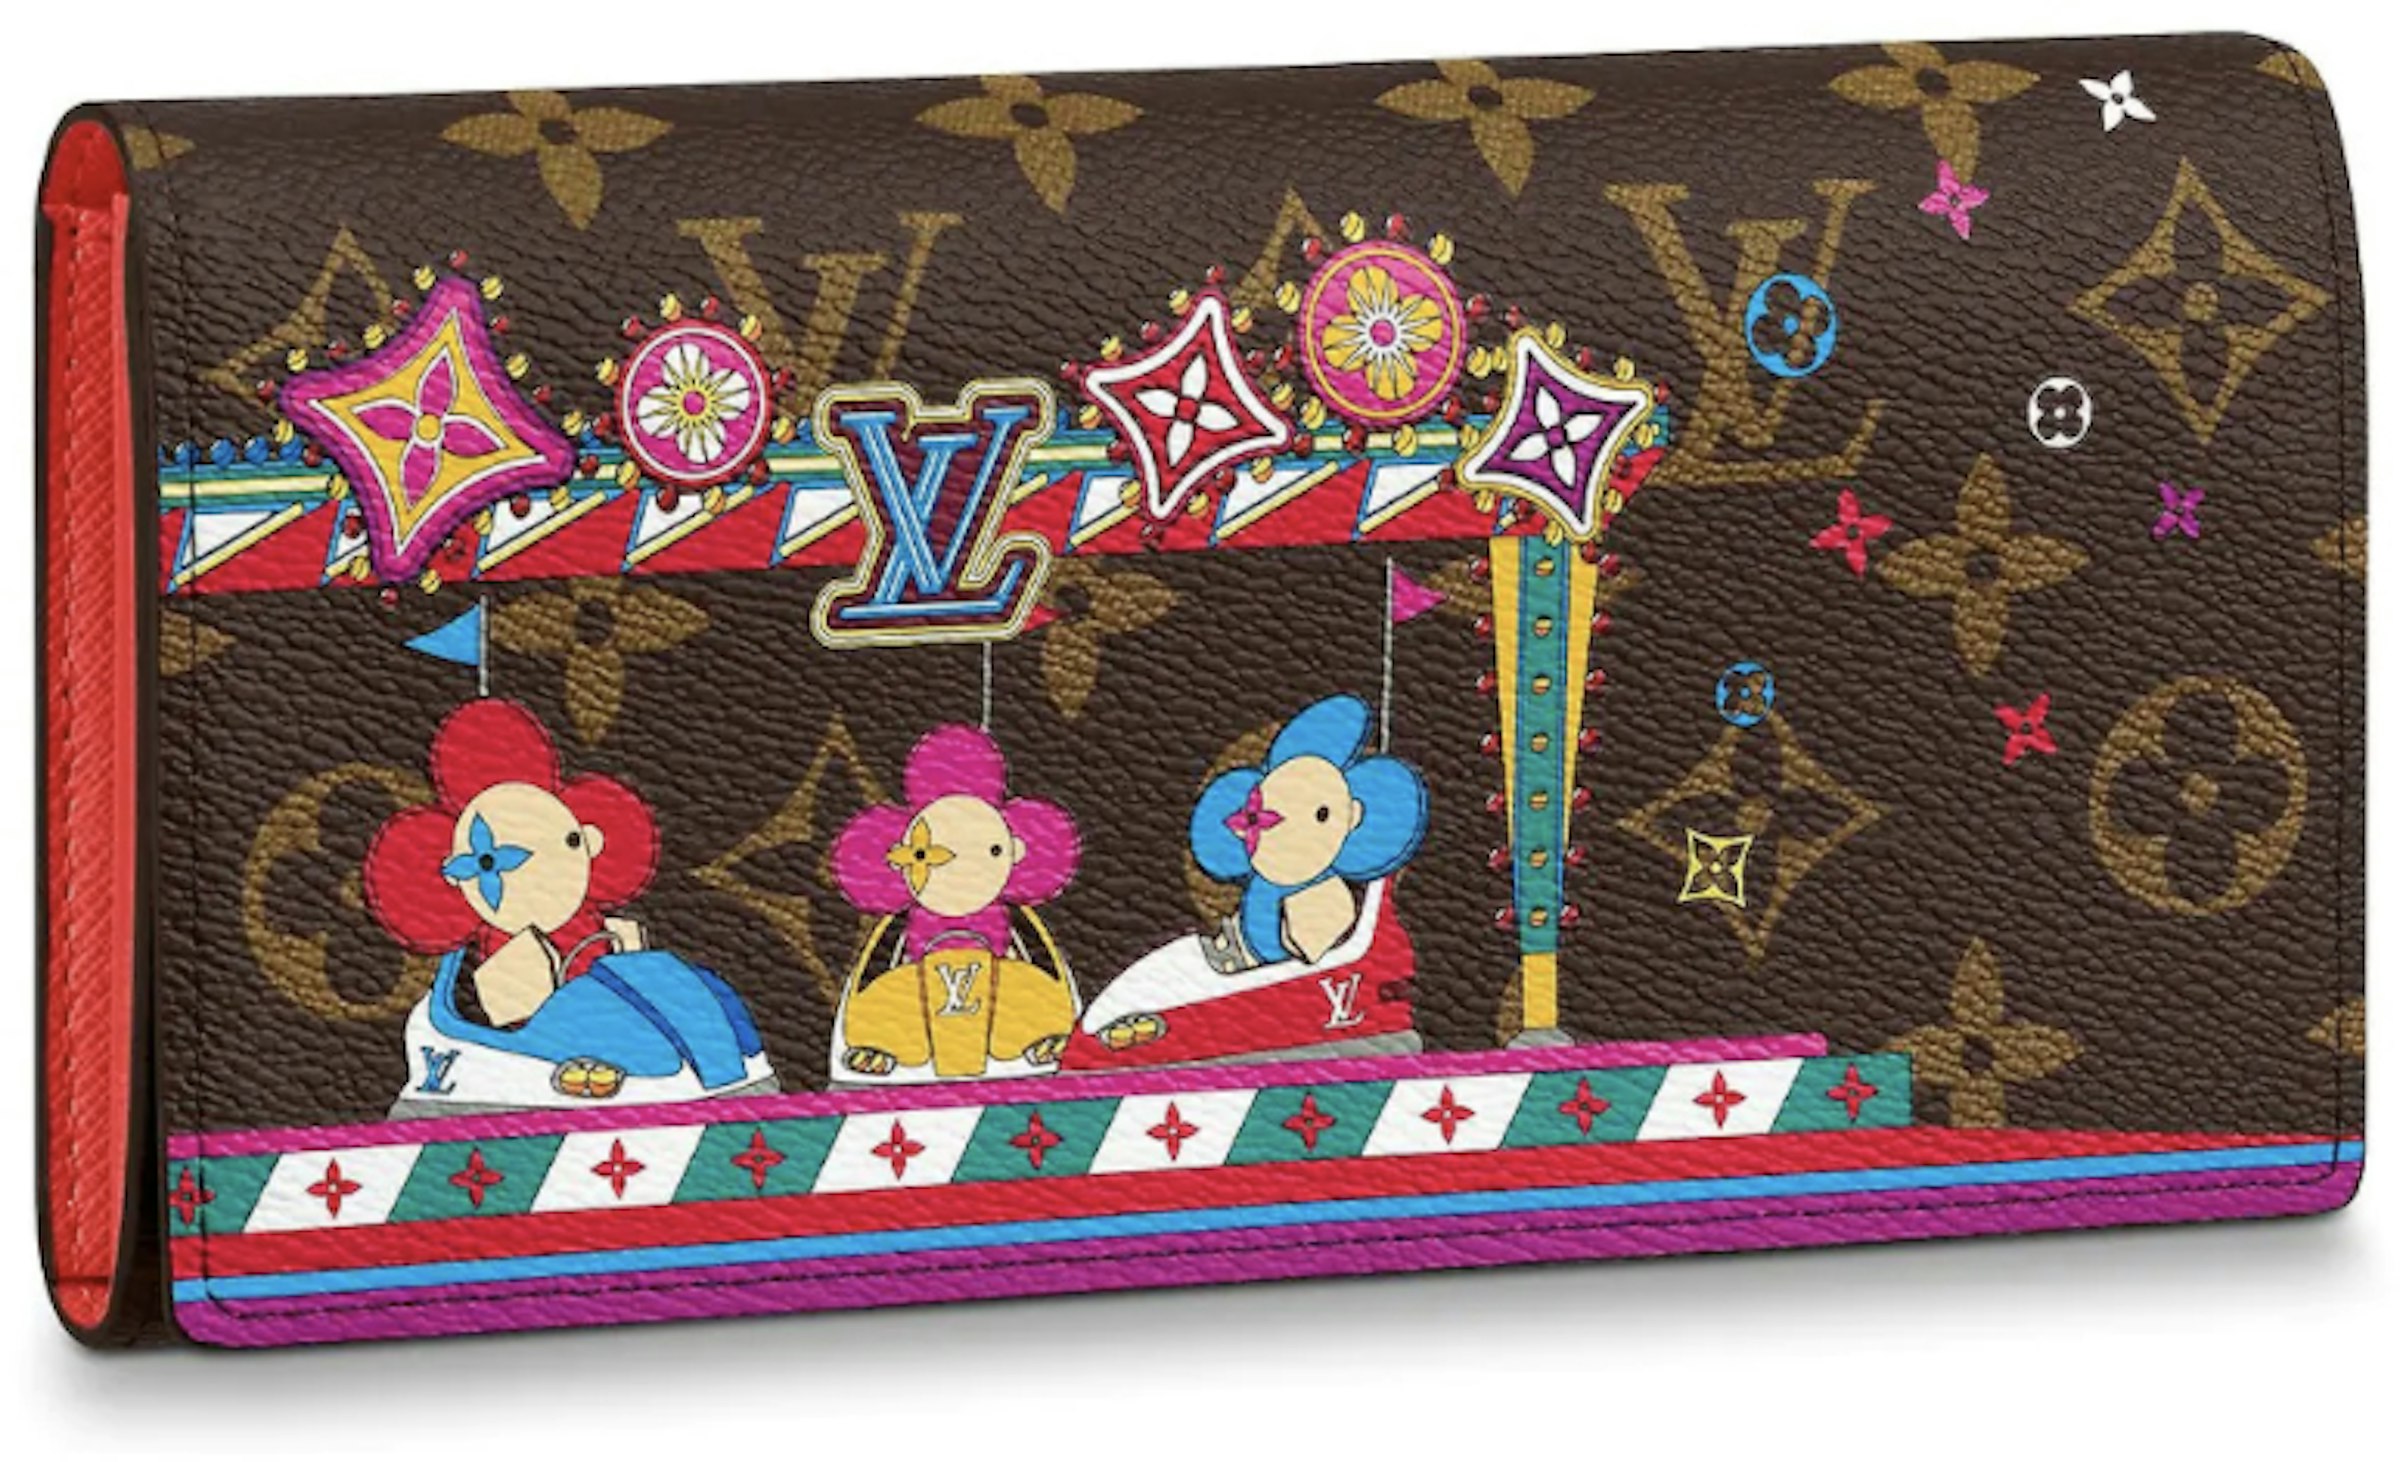 Louis Vuitton Brazza Wallet (16 Card Slot) Clouds Monogram Blue in Coated  Canvas - US